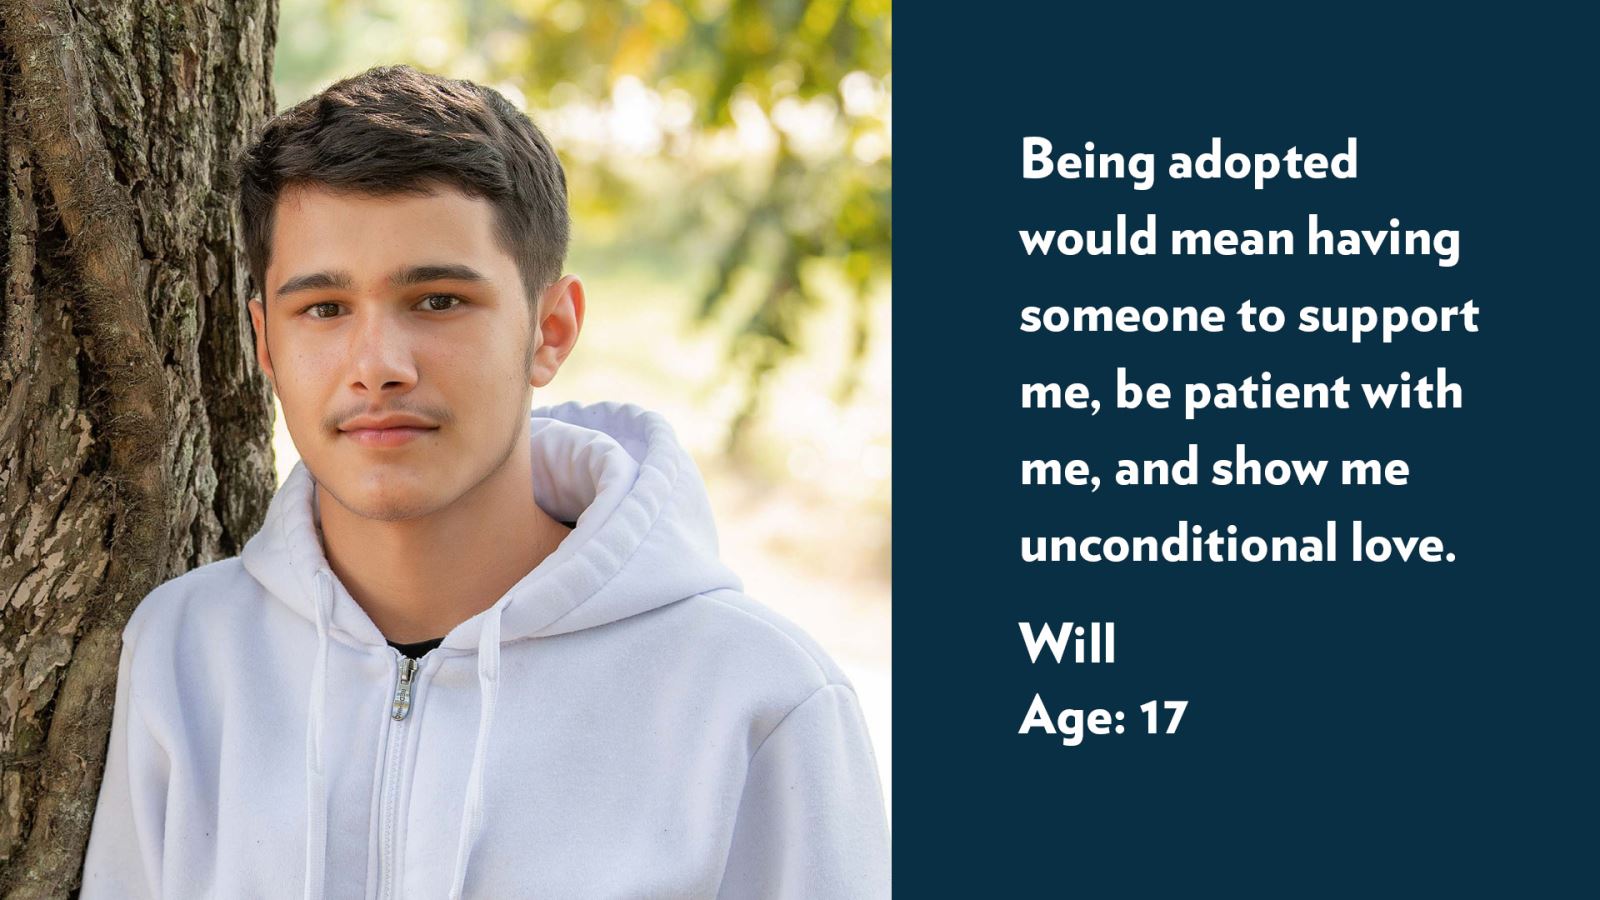 Will, age 17. Being adopted would mean having someone to support me, be patient with me, and show me unconditional love.